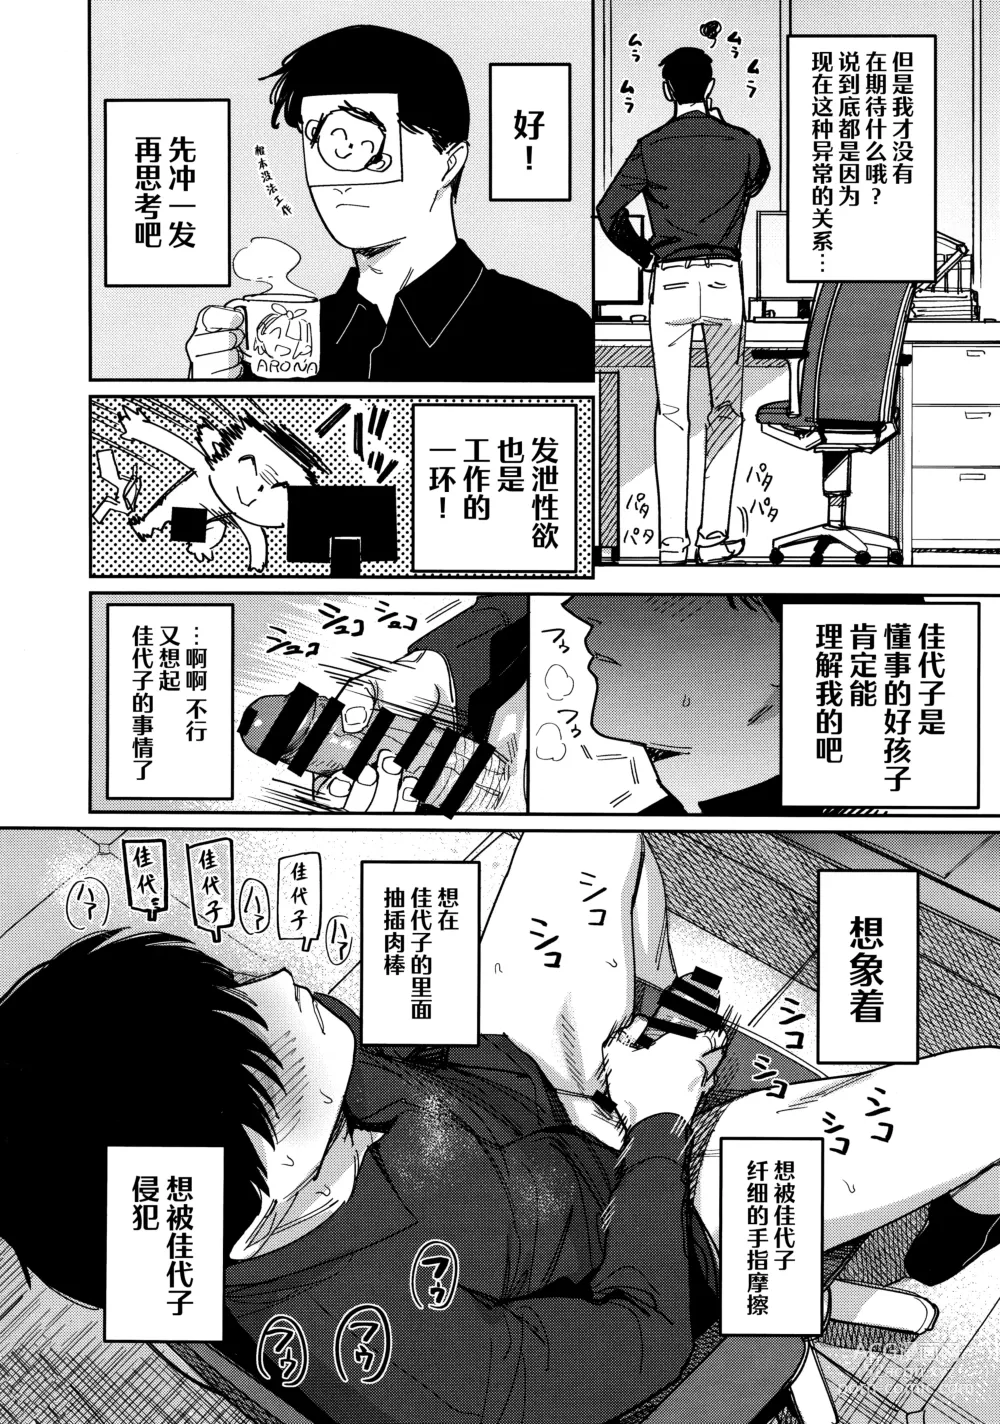 Page 4 of doujinshi 鬼方佳代子不会做这种事情 Part.2